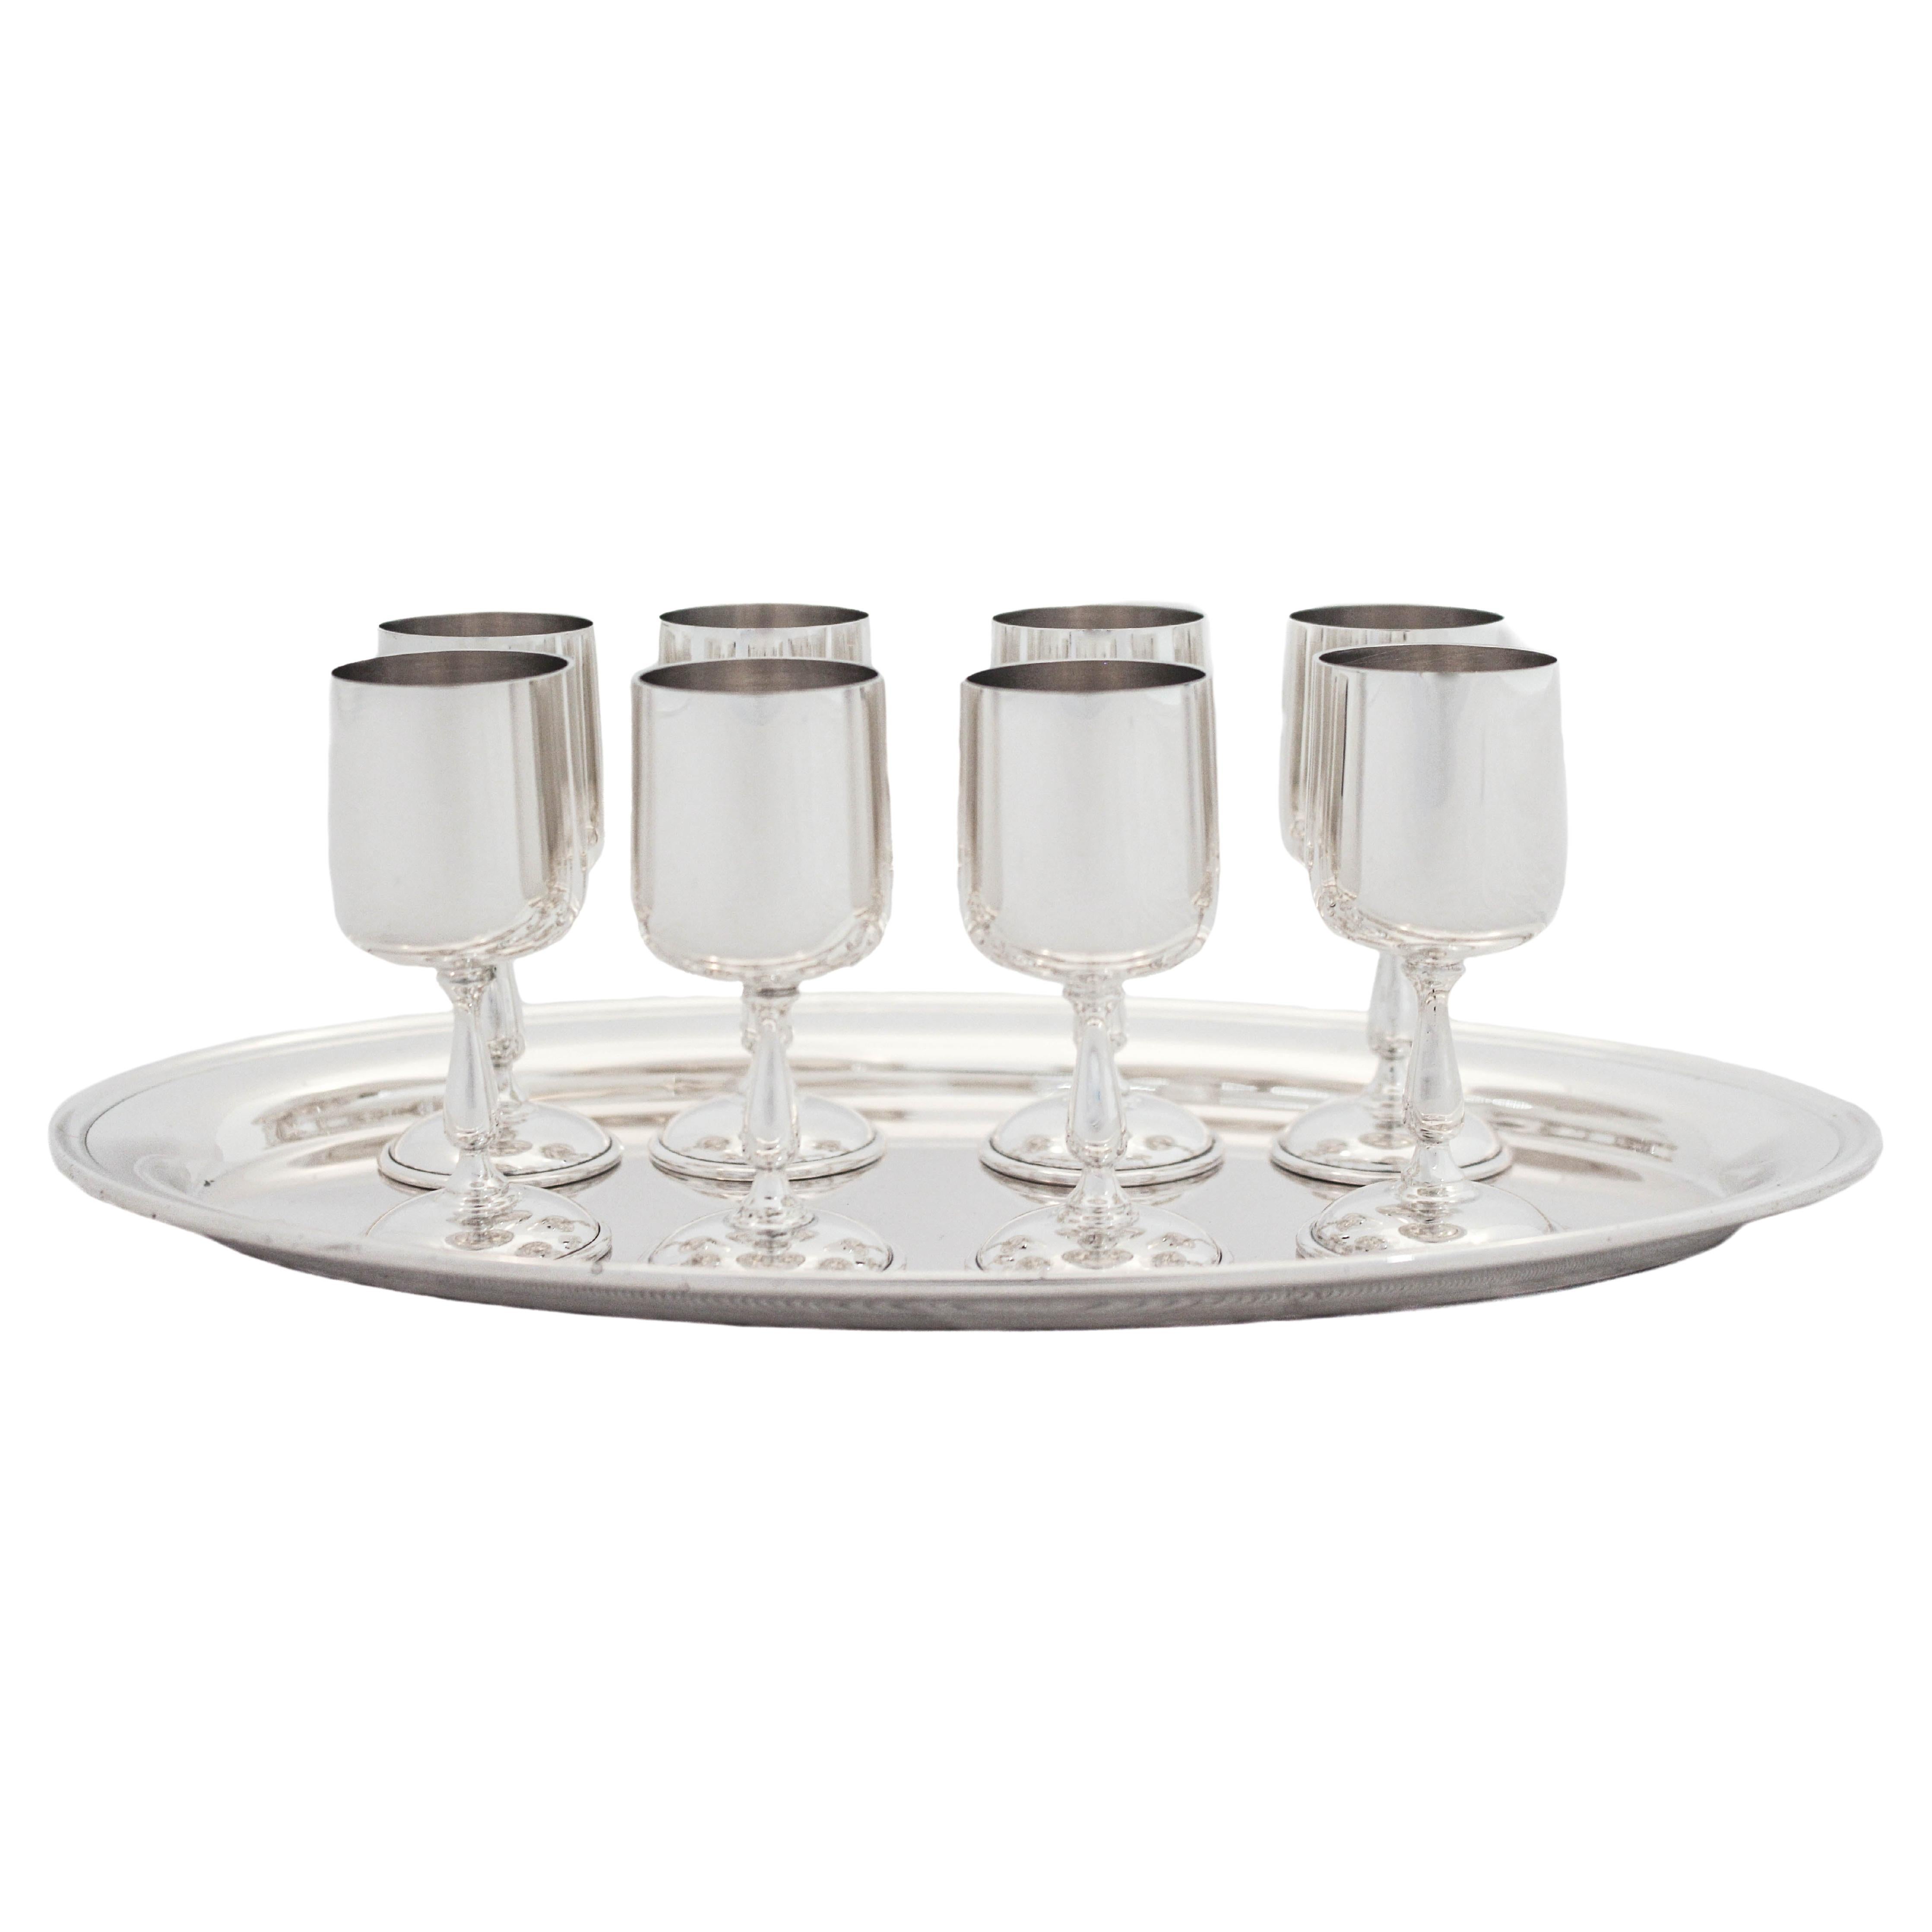 Set of 8 Sterling Silver Cordials & Tray For Sale